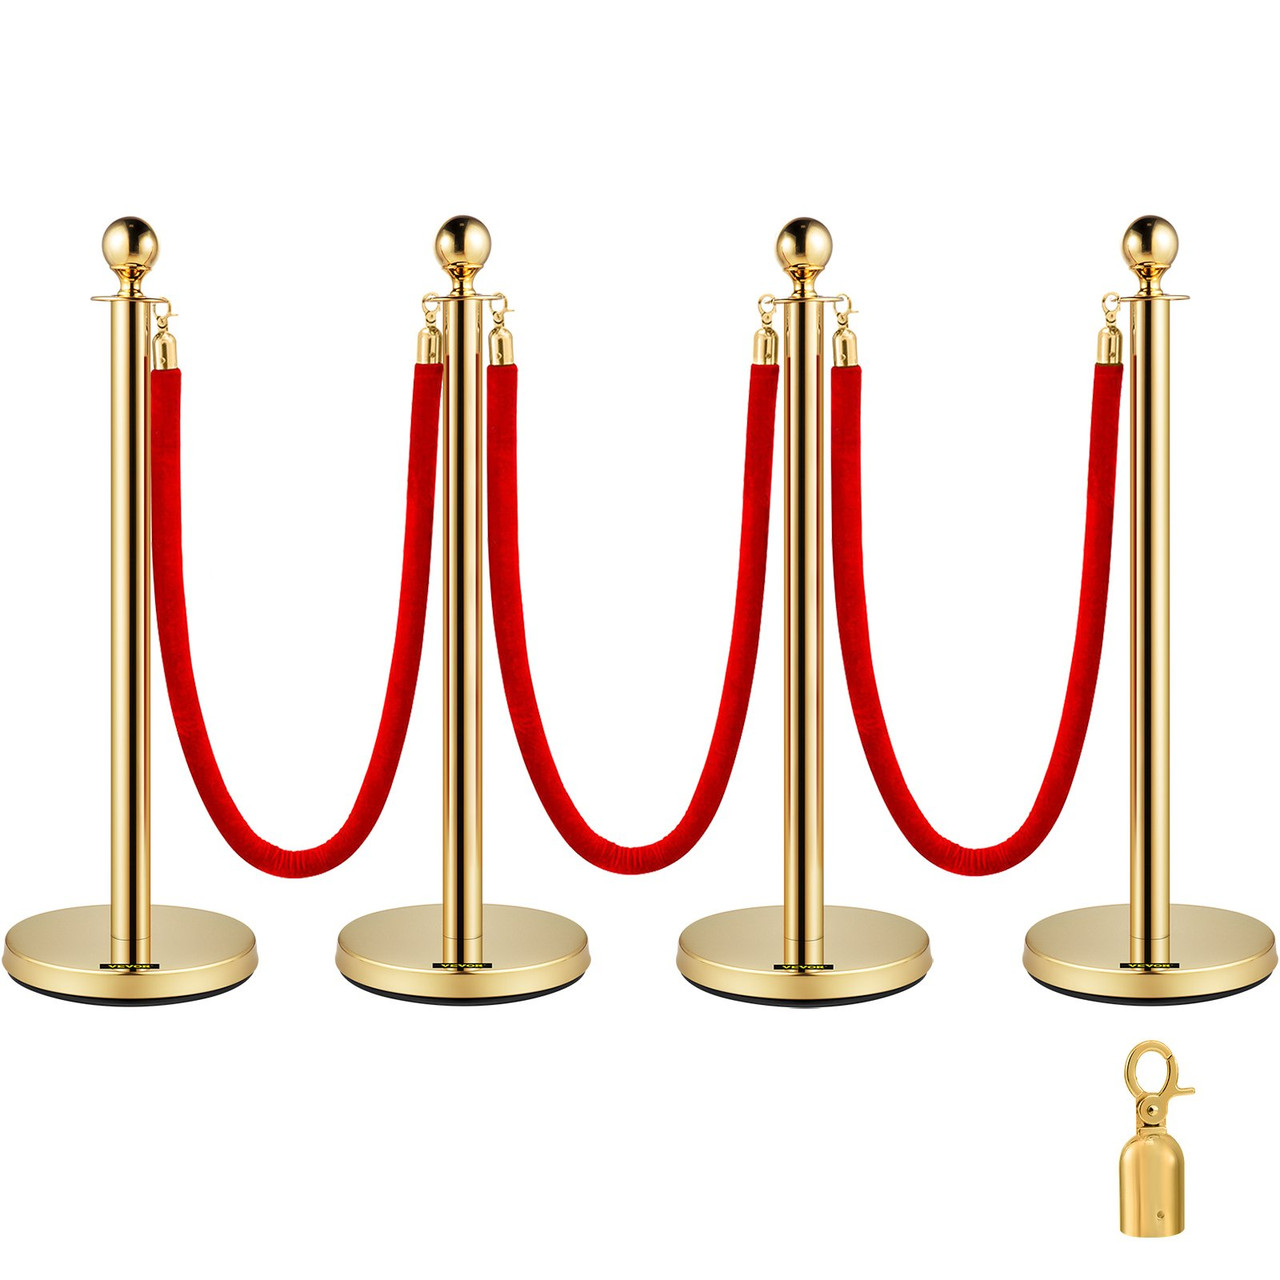 4PCS Gold Stanchion Posts Queue, 38 Inch Red Velvet Rope, Crowd Control Barriers Queue Line Rope, Barriers for Party Supplies